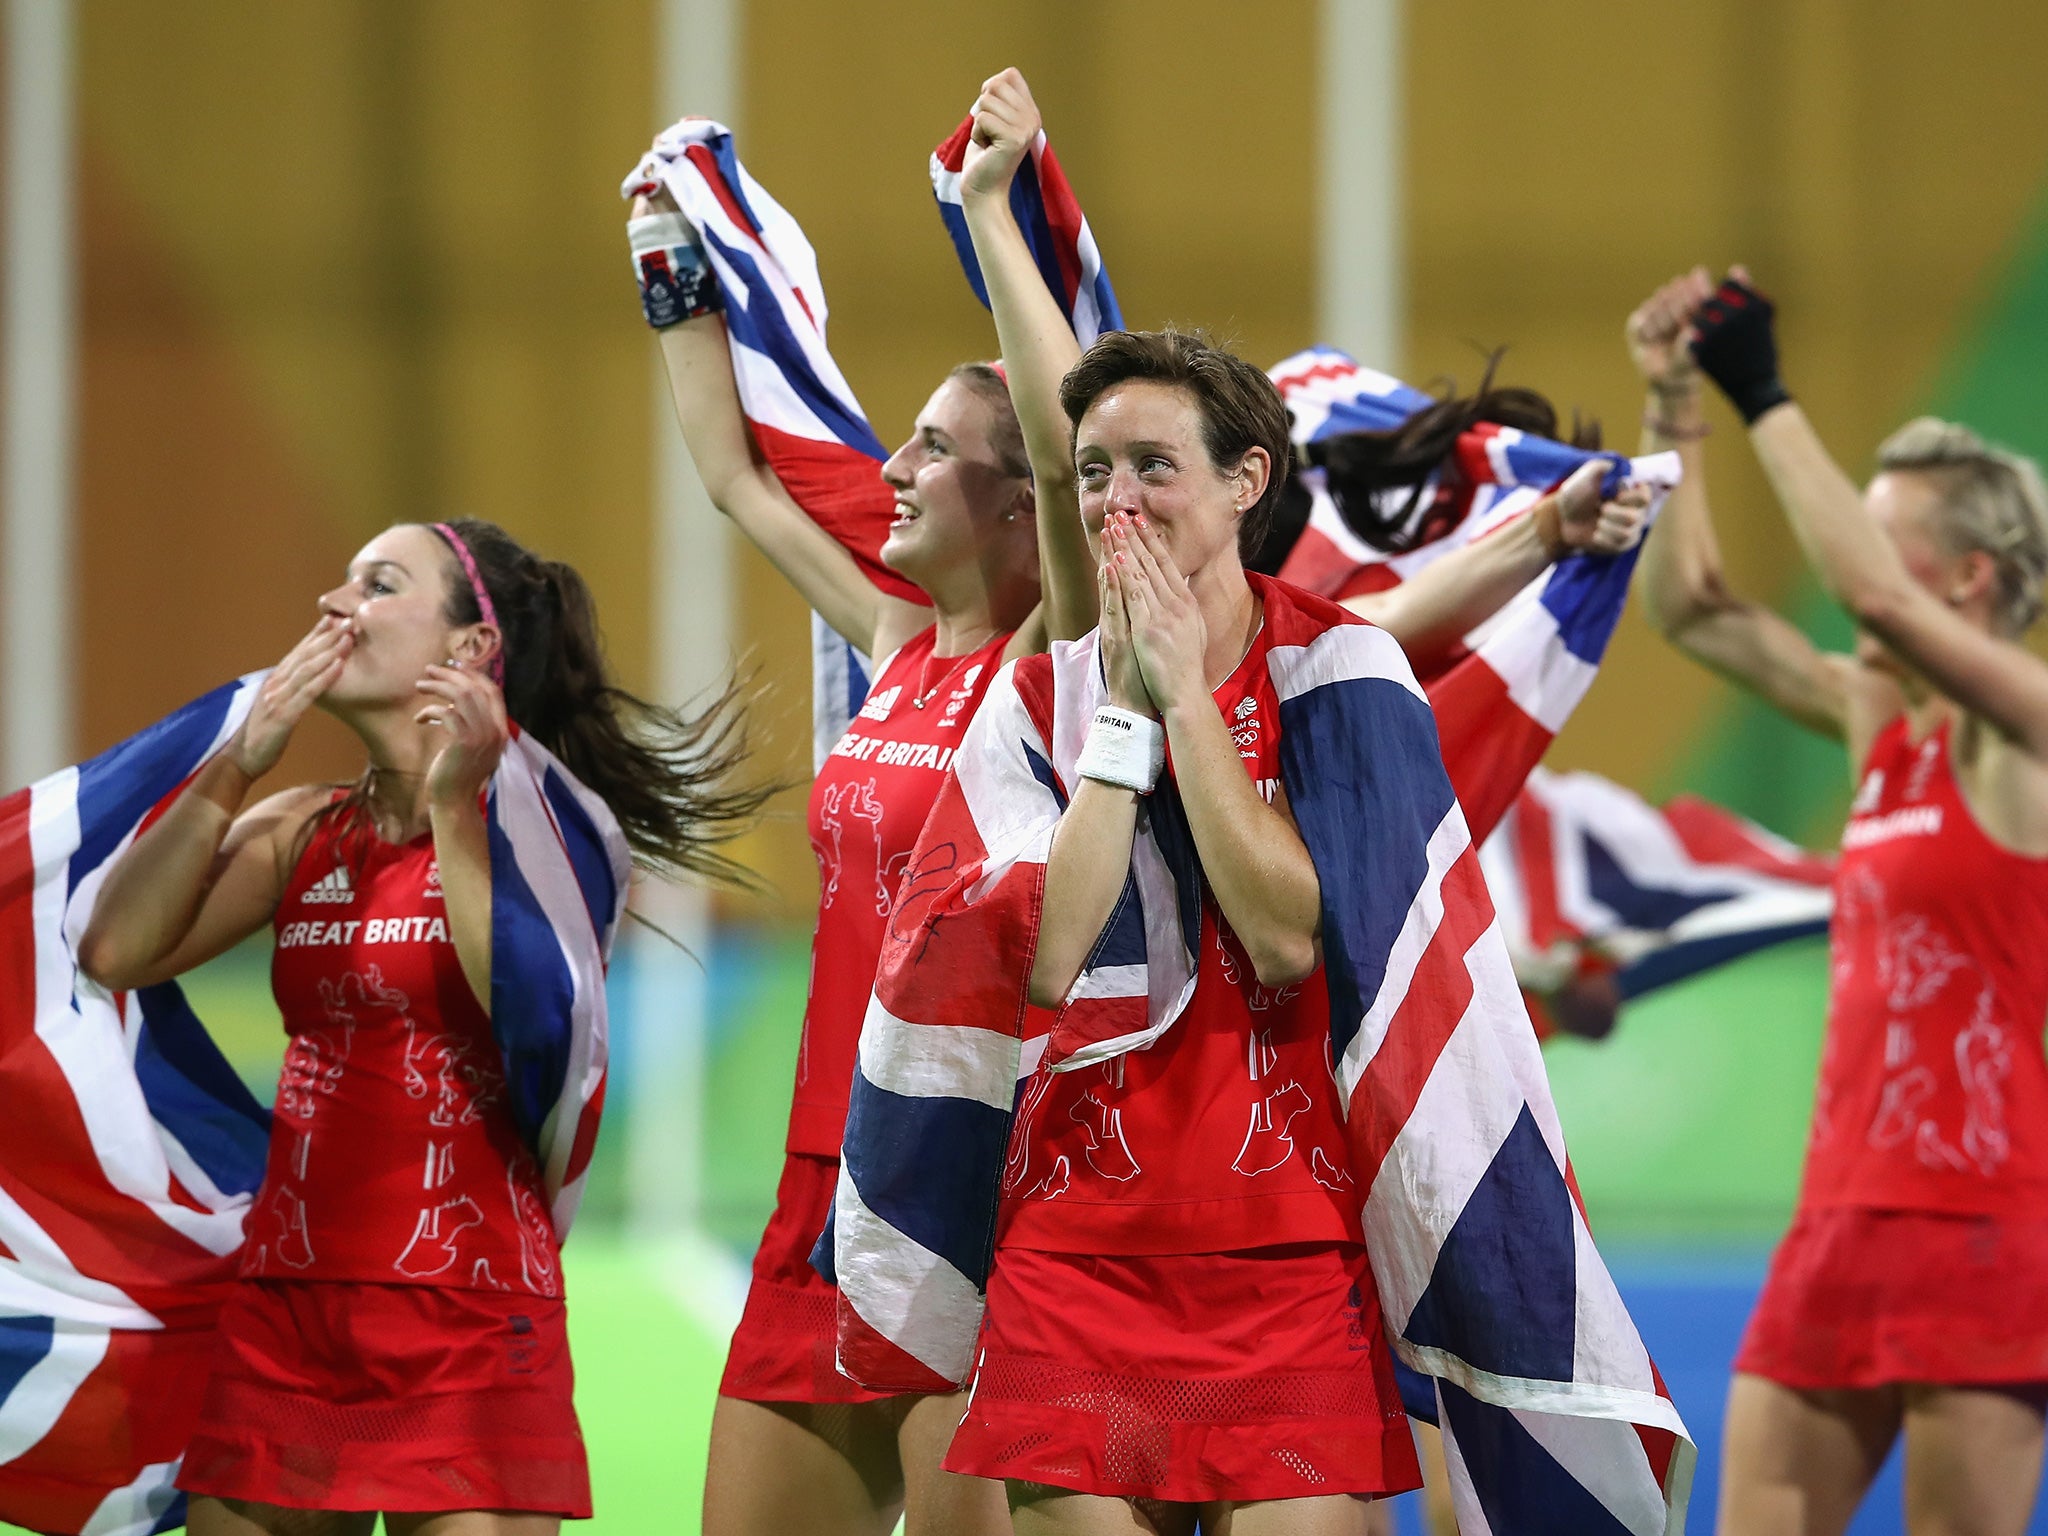 Hannah McLeod can barely contain her emotion after Britain's historic win